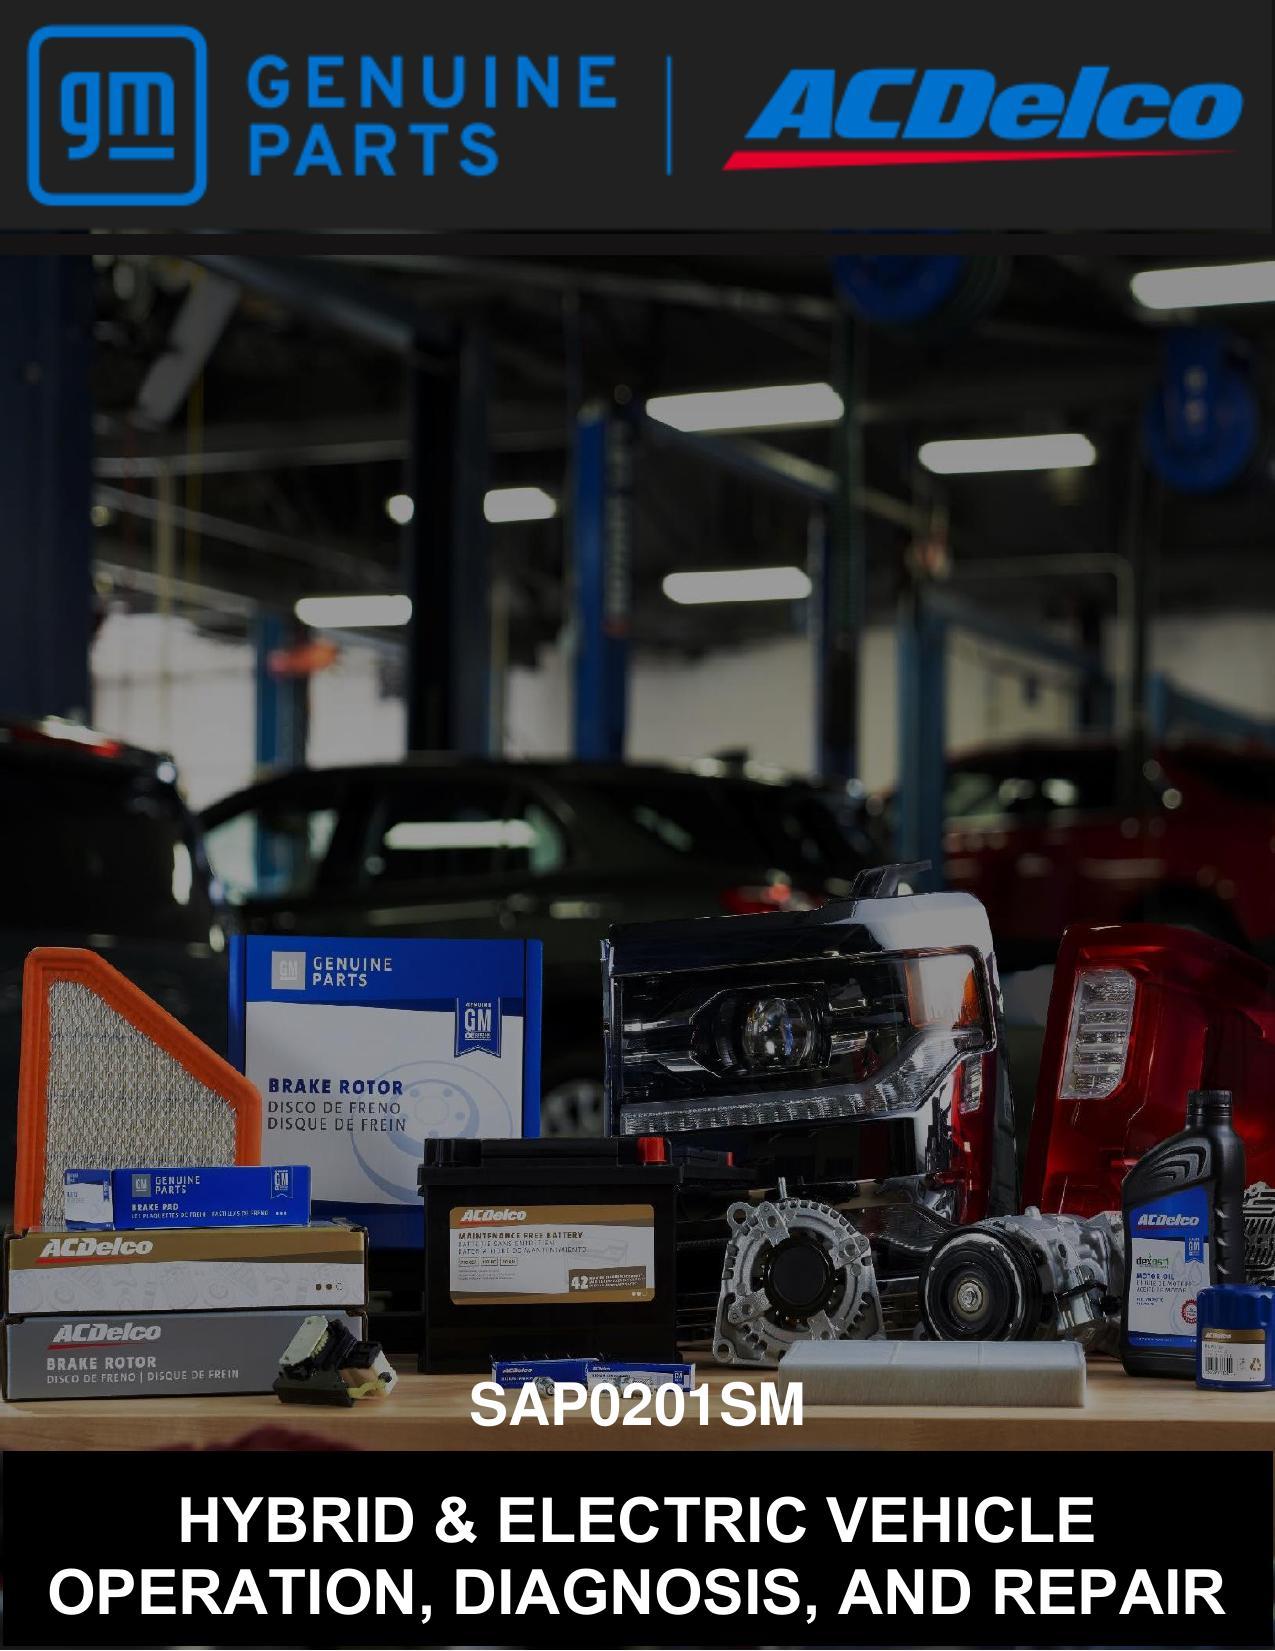 sapozo1sm---hybrid-and-electric-vehicle-operation-diagnosis-and-repair.pdf